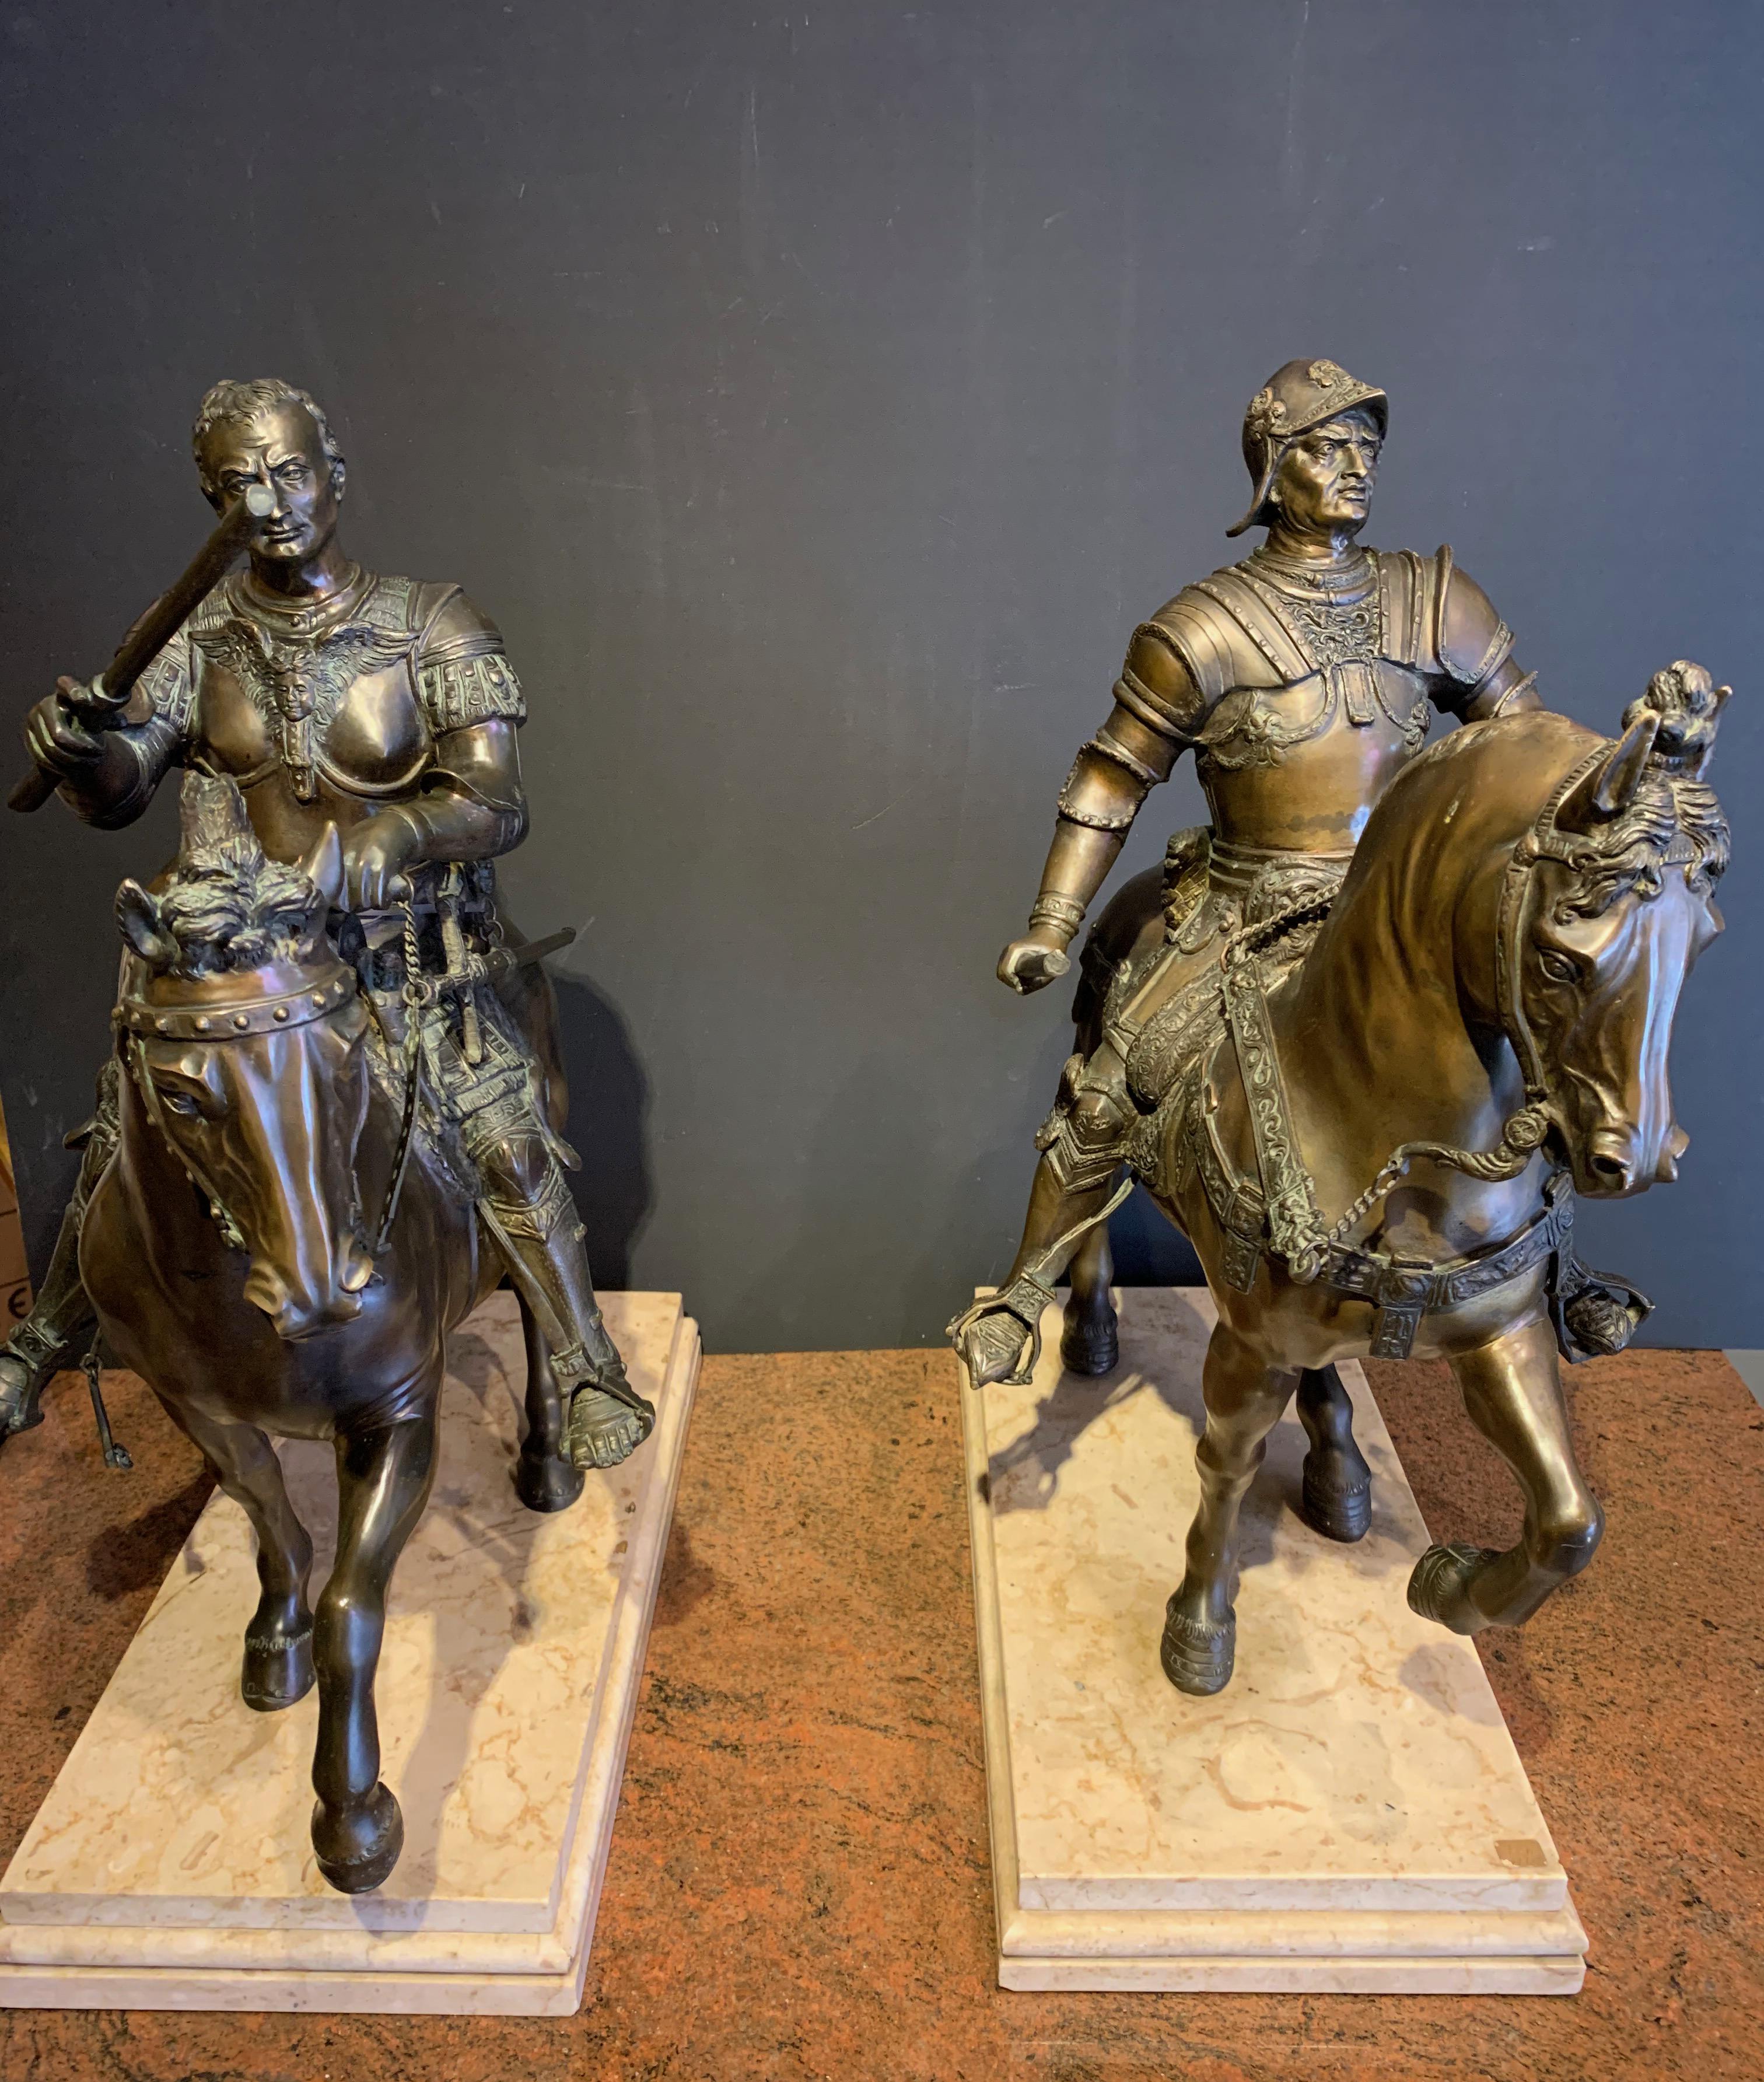 Pair of large brown patina bronzes featuring Condottiere straddling a horse.
One is that of Bartolomeo Colleoni, Lieutenant General of the Serenissima, based on a bronze by Andrea del Verrochio, who worked on it from 1483 to 1488.
Cast by Alessandro